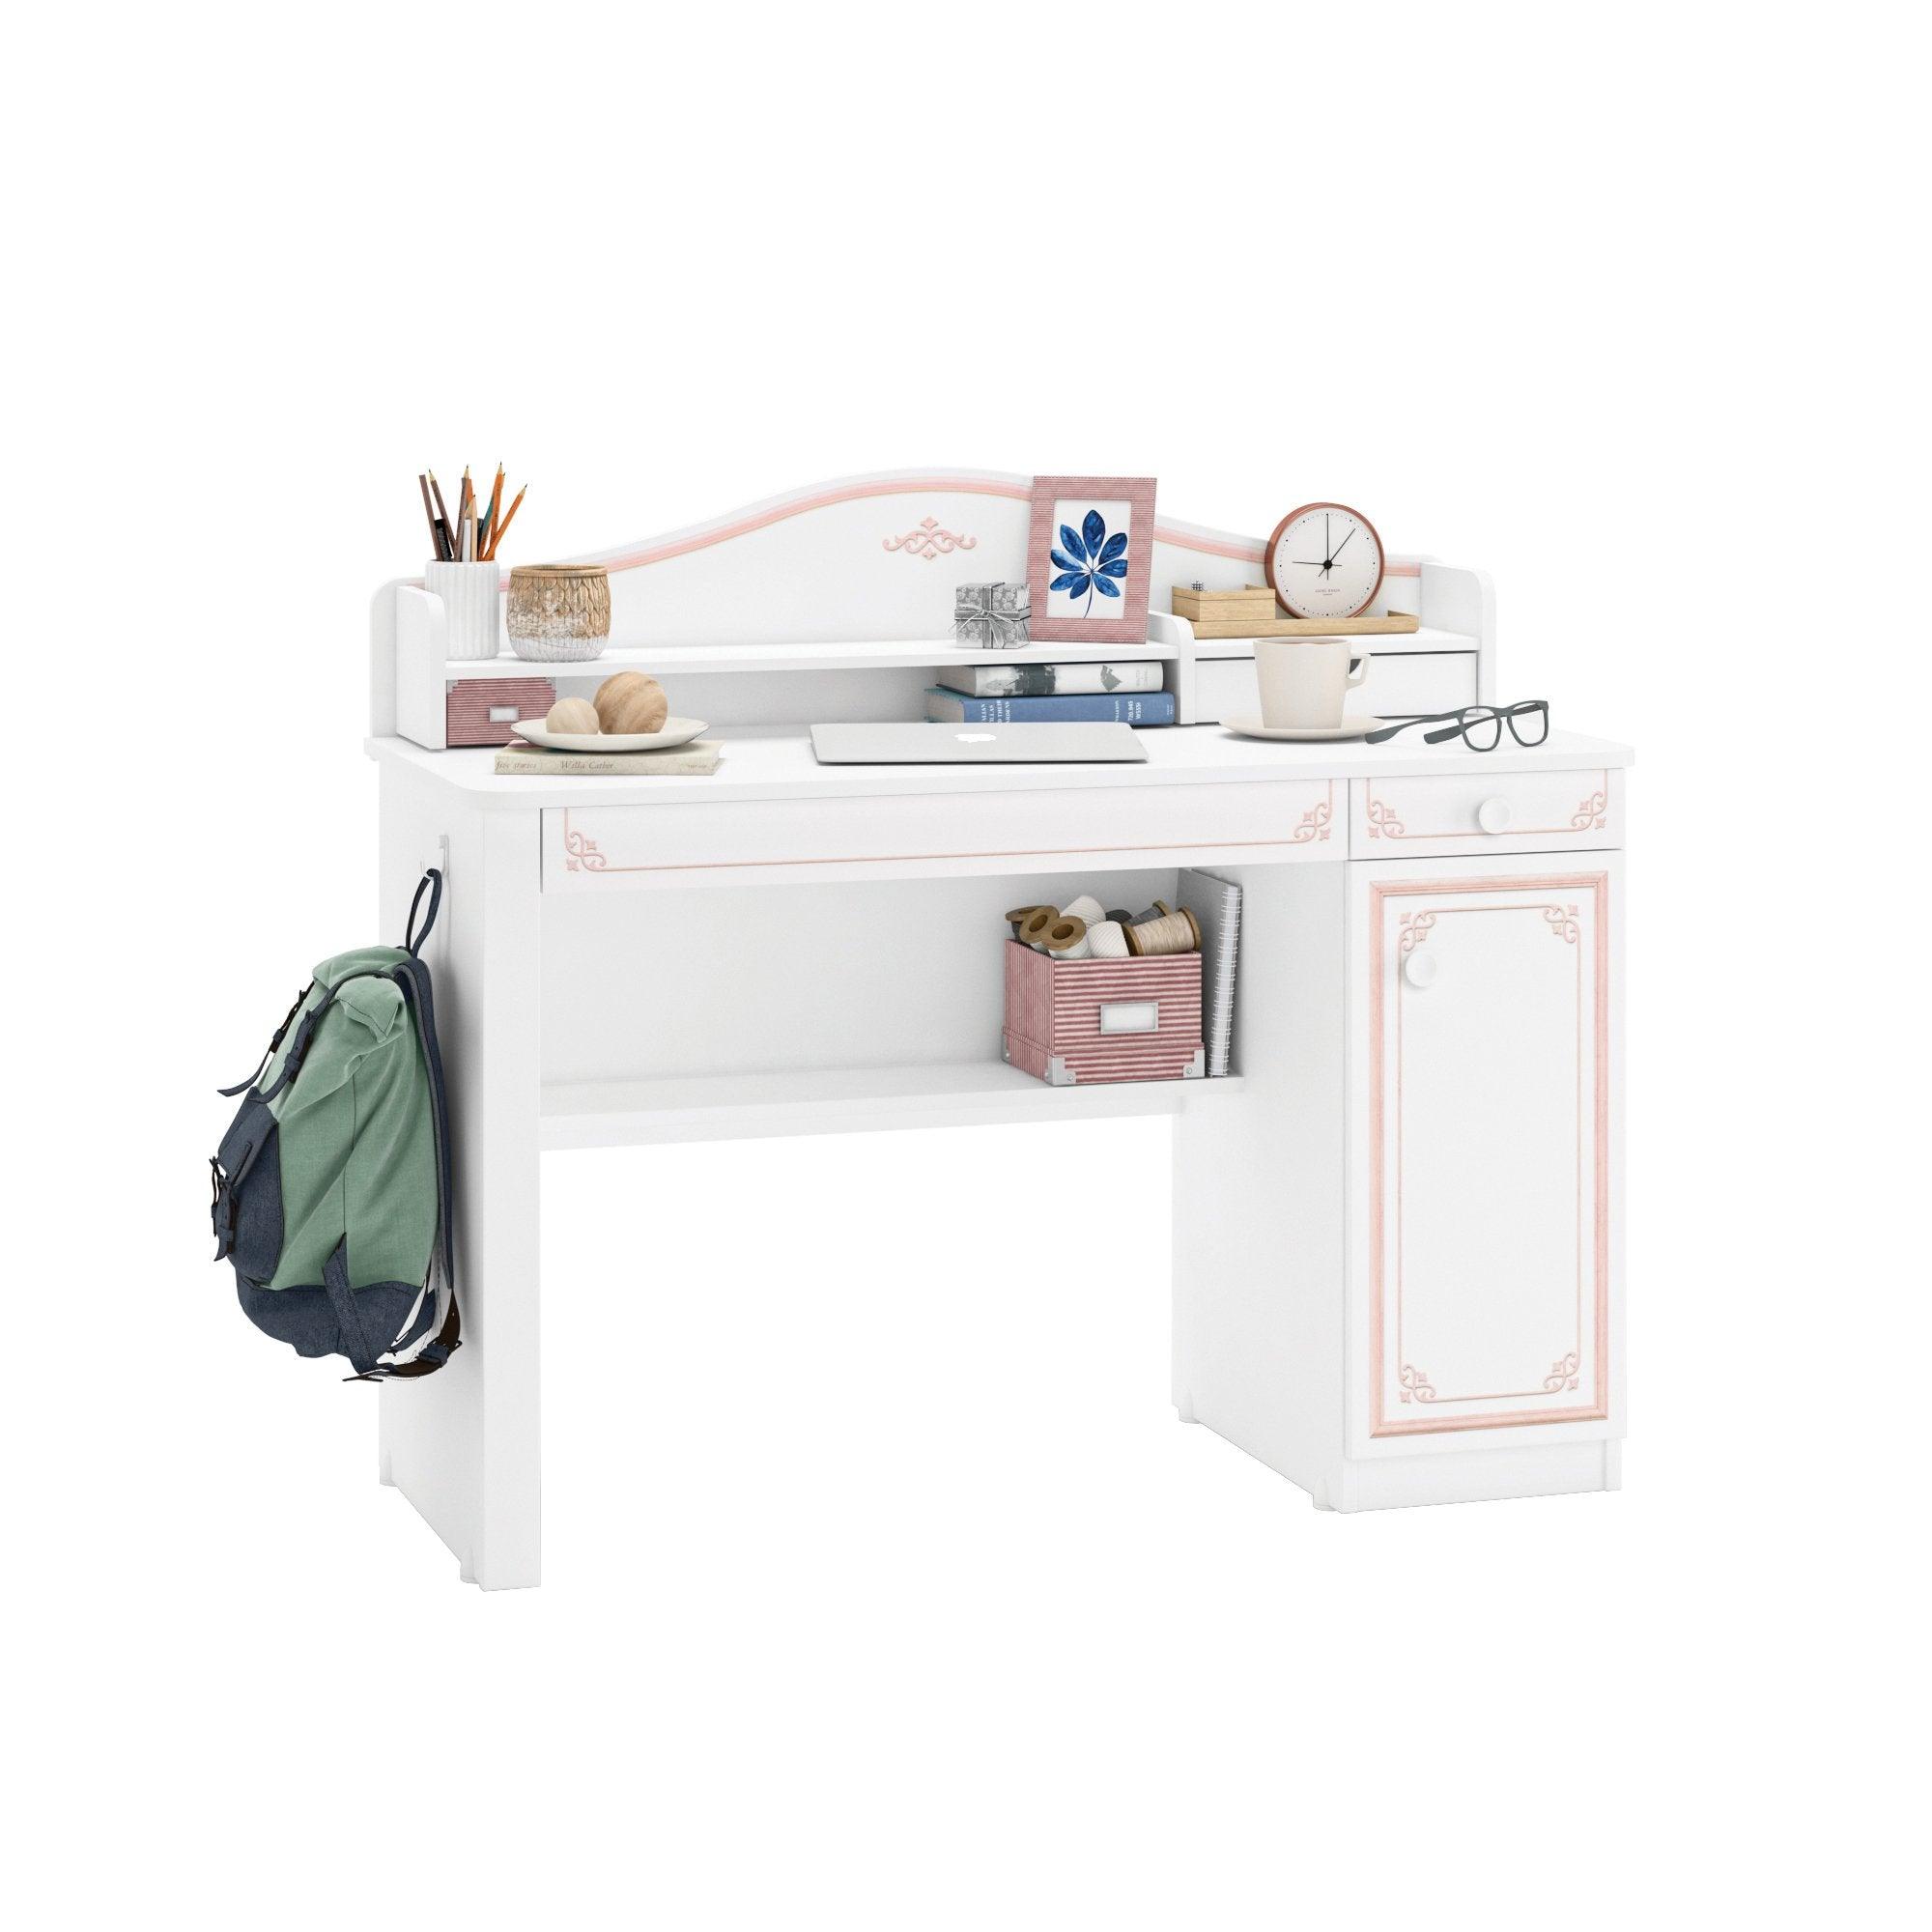 Cilek Selena Pink Small Study Unit Only (Fits Line Desk too) - Kids Haven